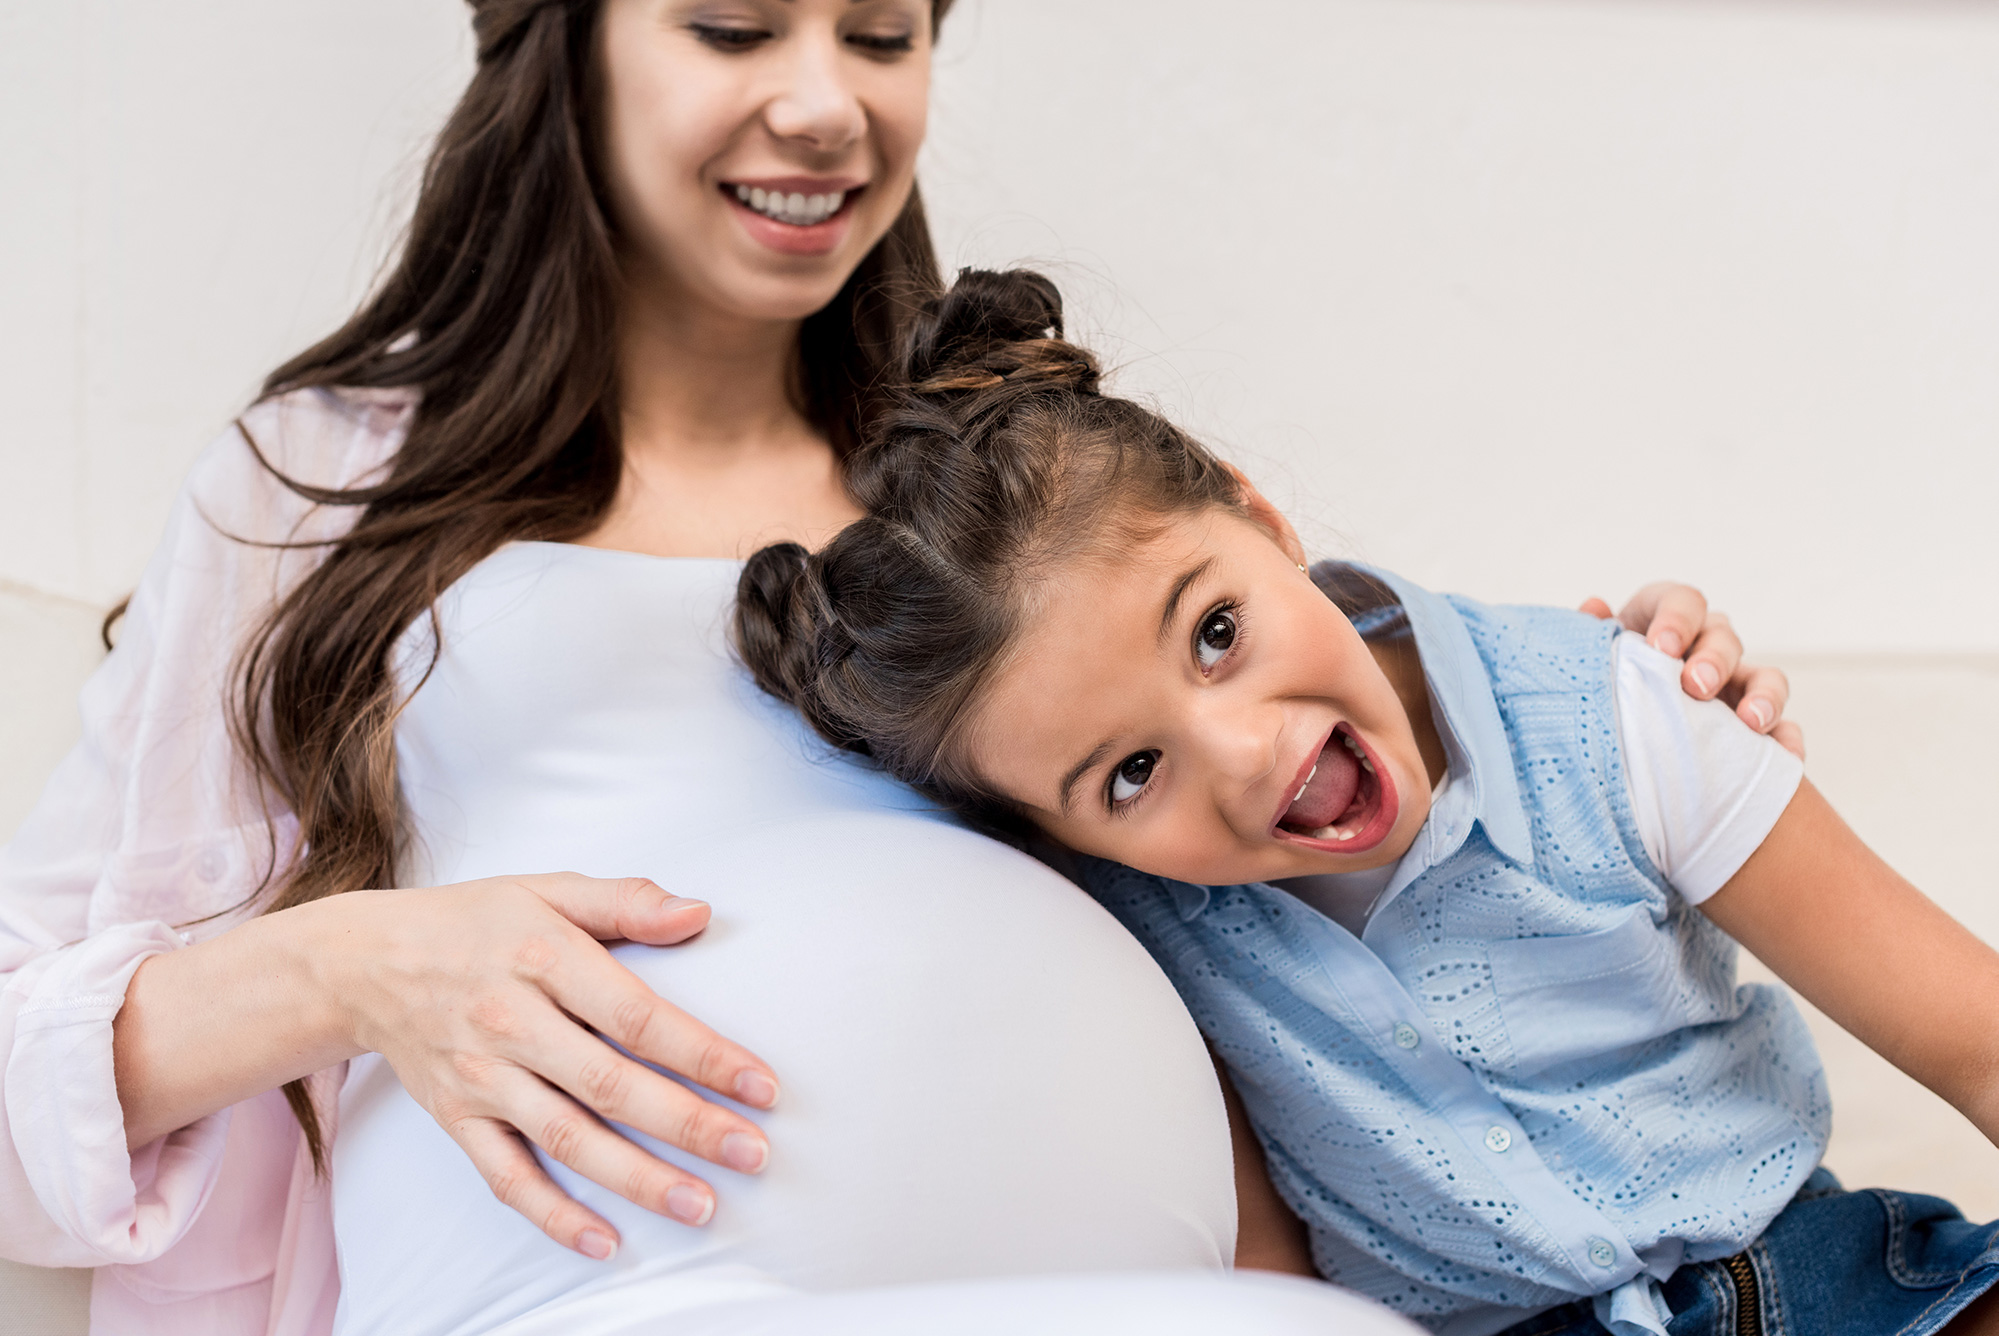 Pregnant woman with long brown hair puts her hand on her pregnant belly as a young girl with a happy face listens to the belly